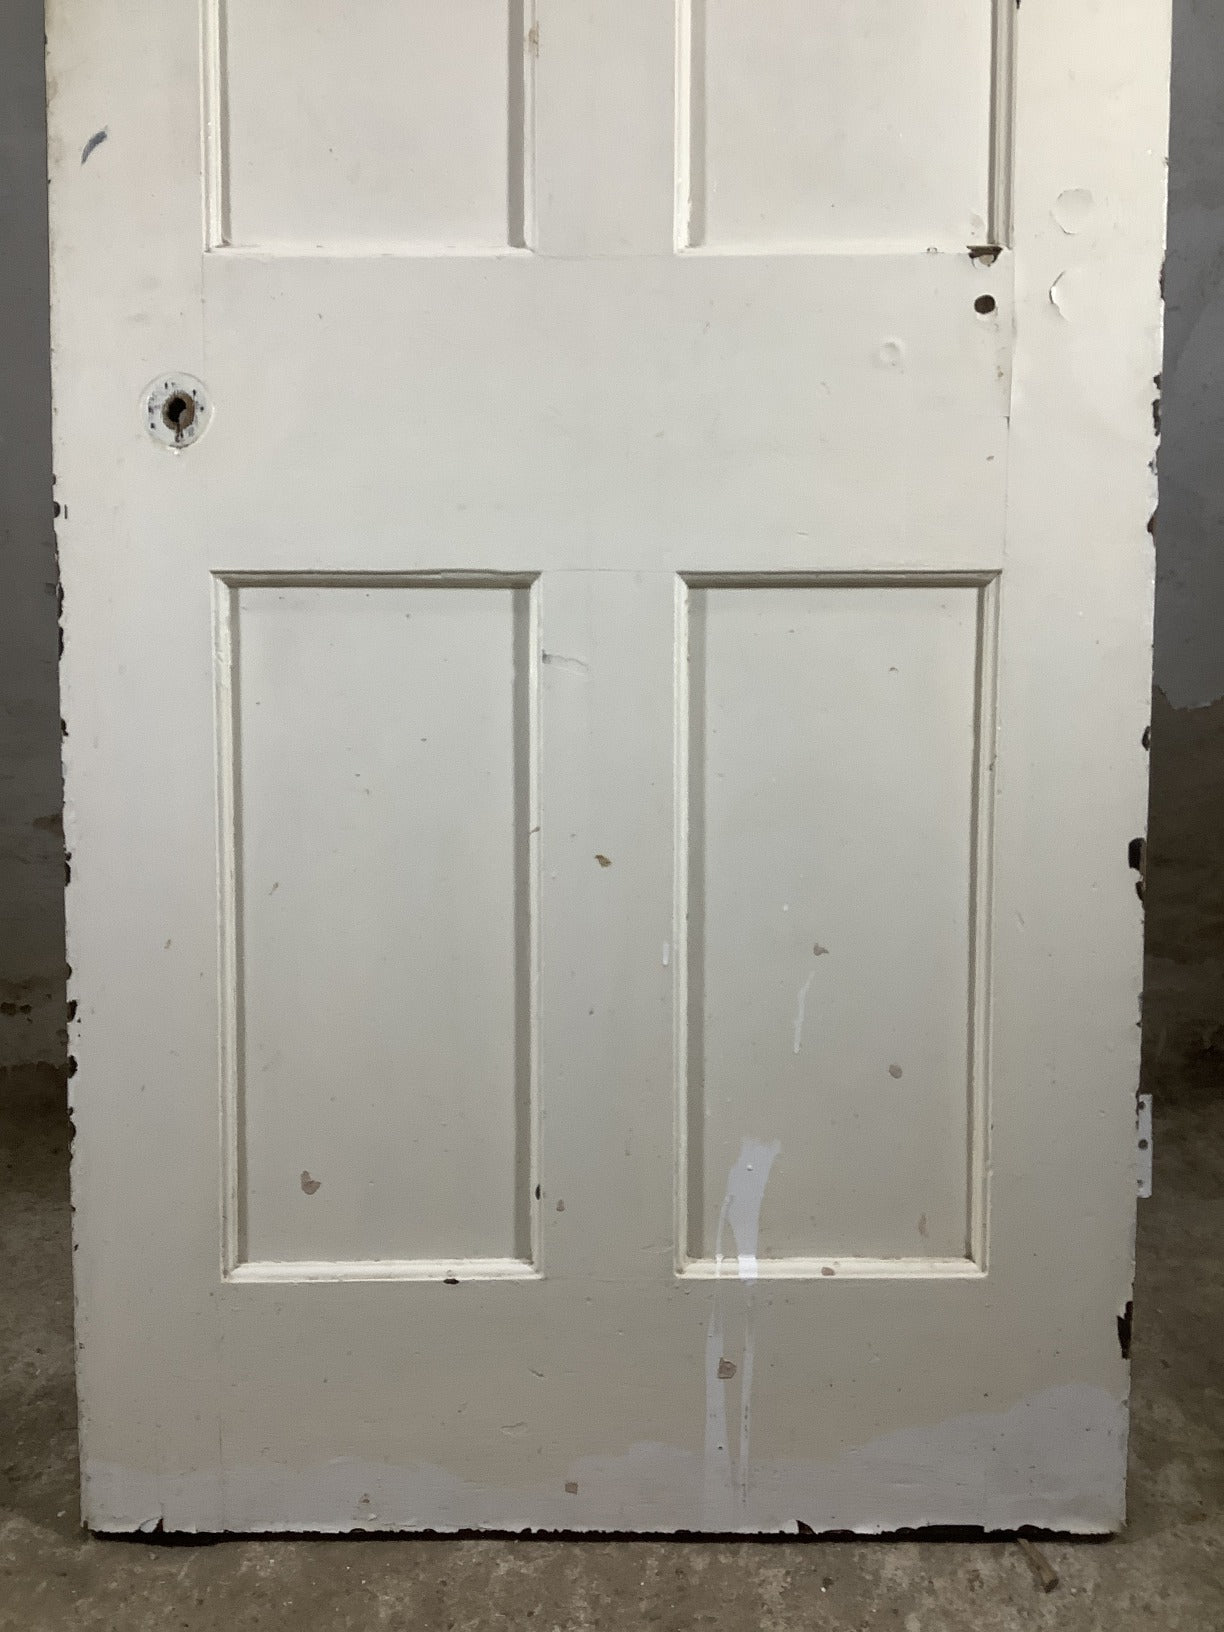 29 3/4"X76 1/2" 1930s Internal Painted Pitch Pine Four Panel Door 2over2 Old